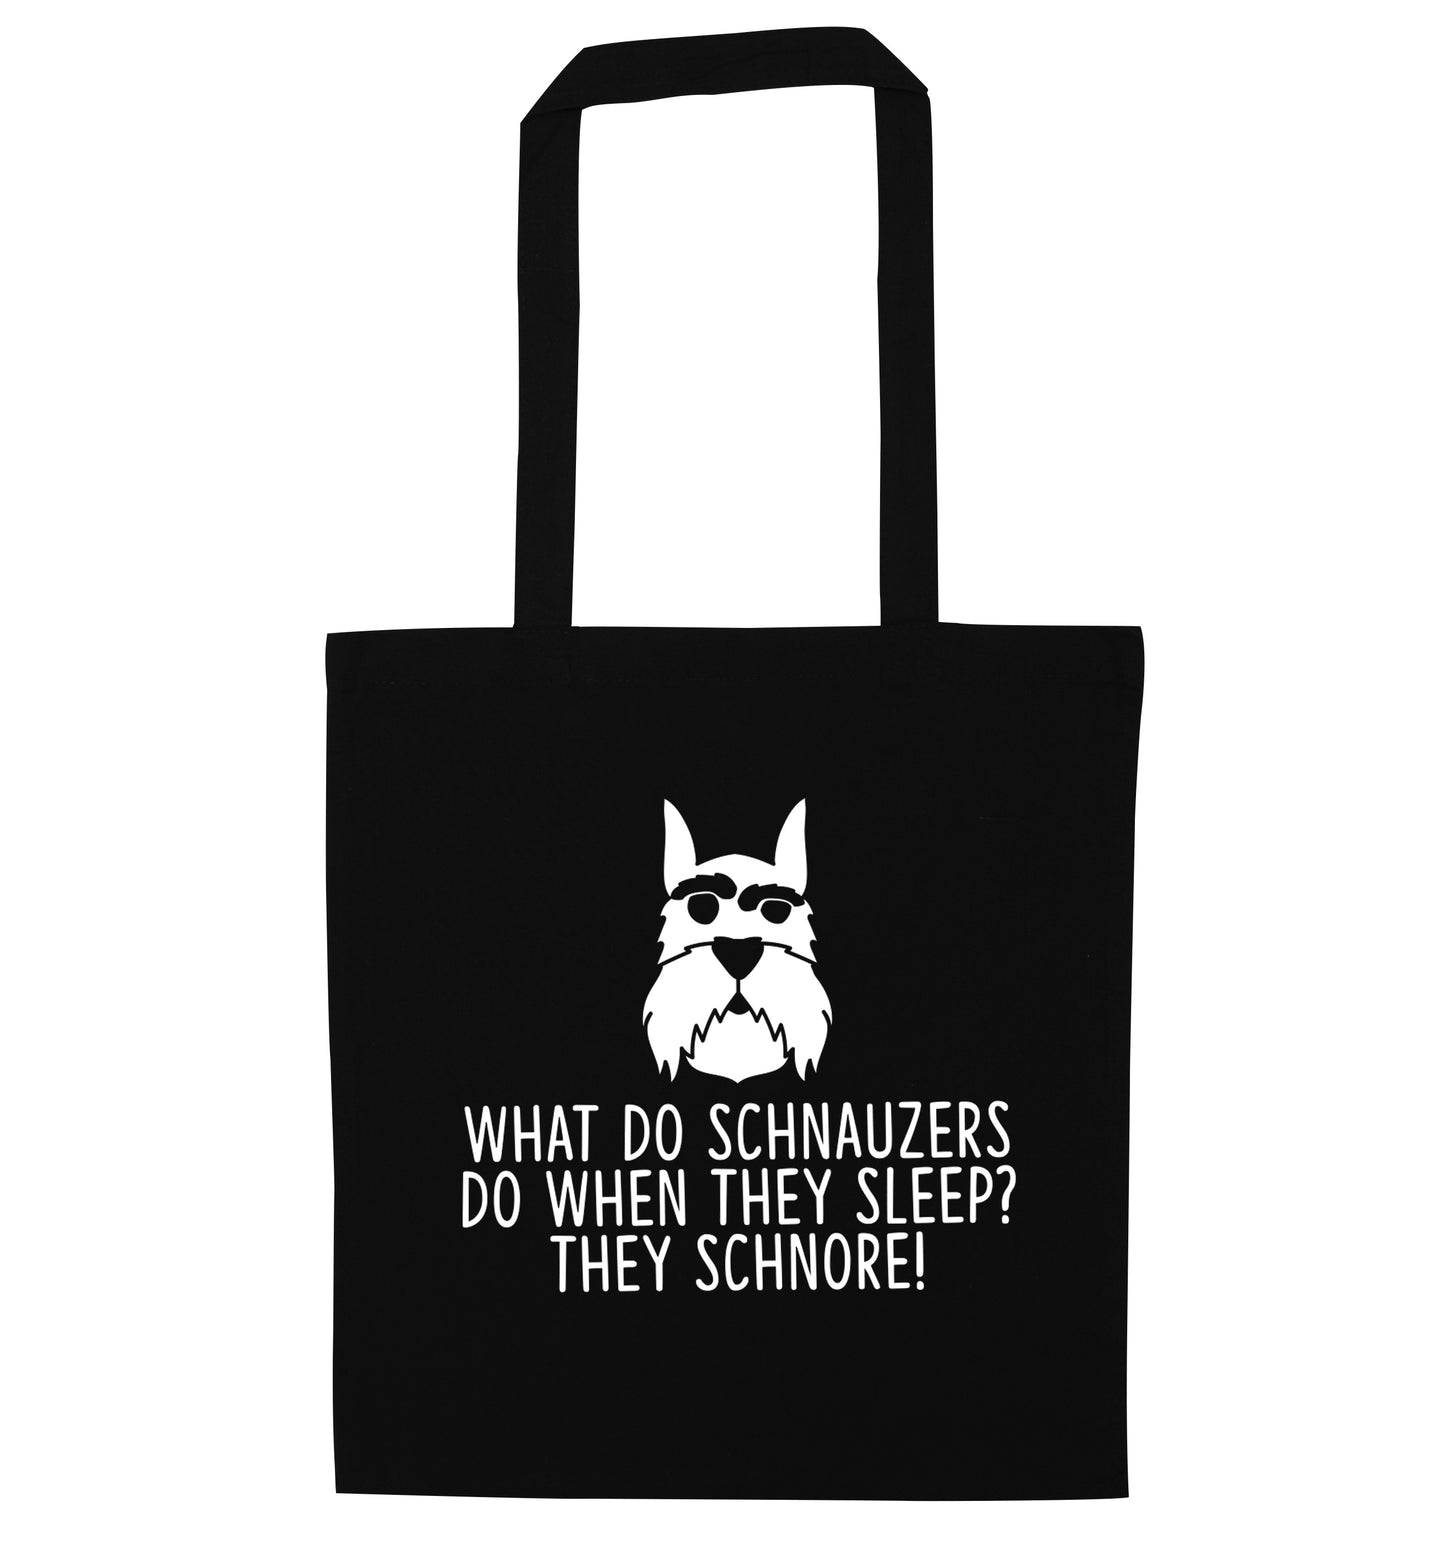 What do schnauzers do when they sleep? Schnore! black tote bag